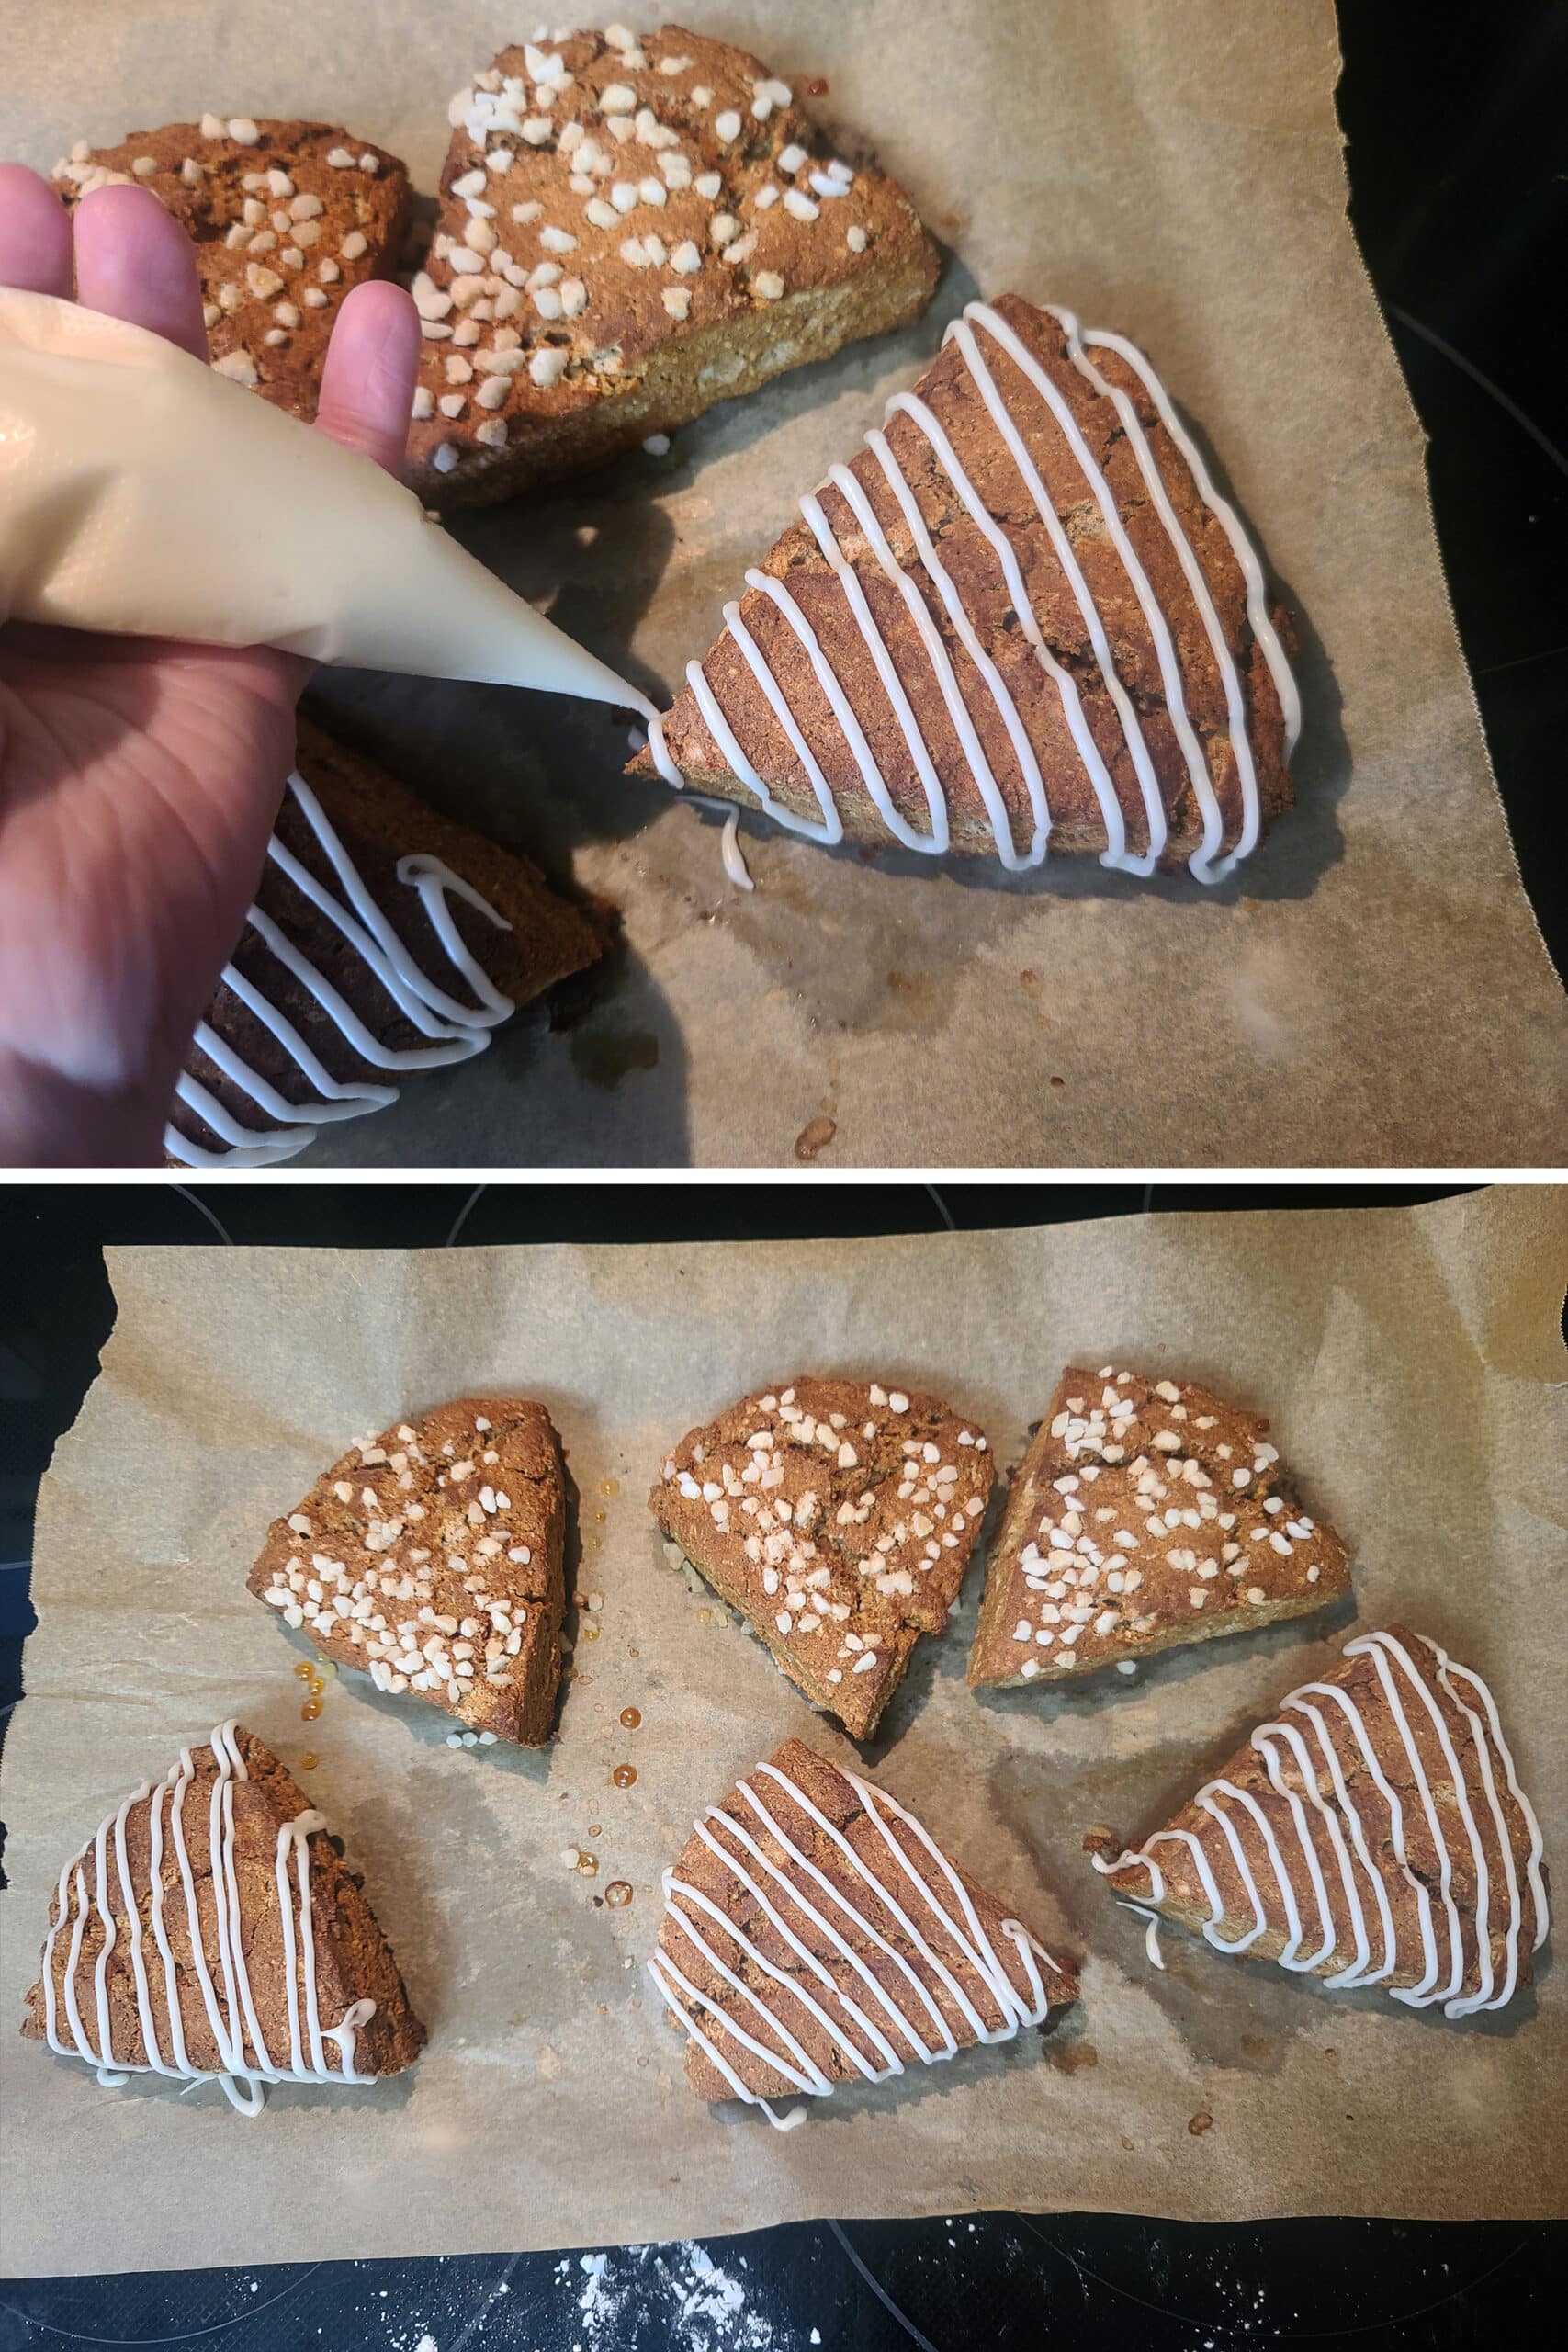 2 part image showing vanilla glaze being drizzled over the gluten free scones.